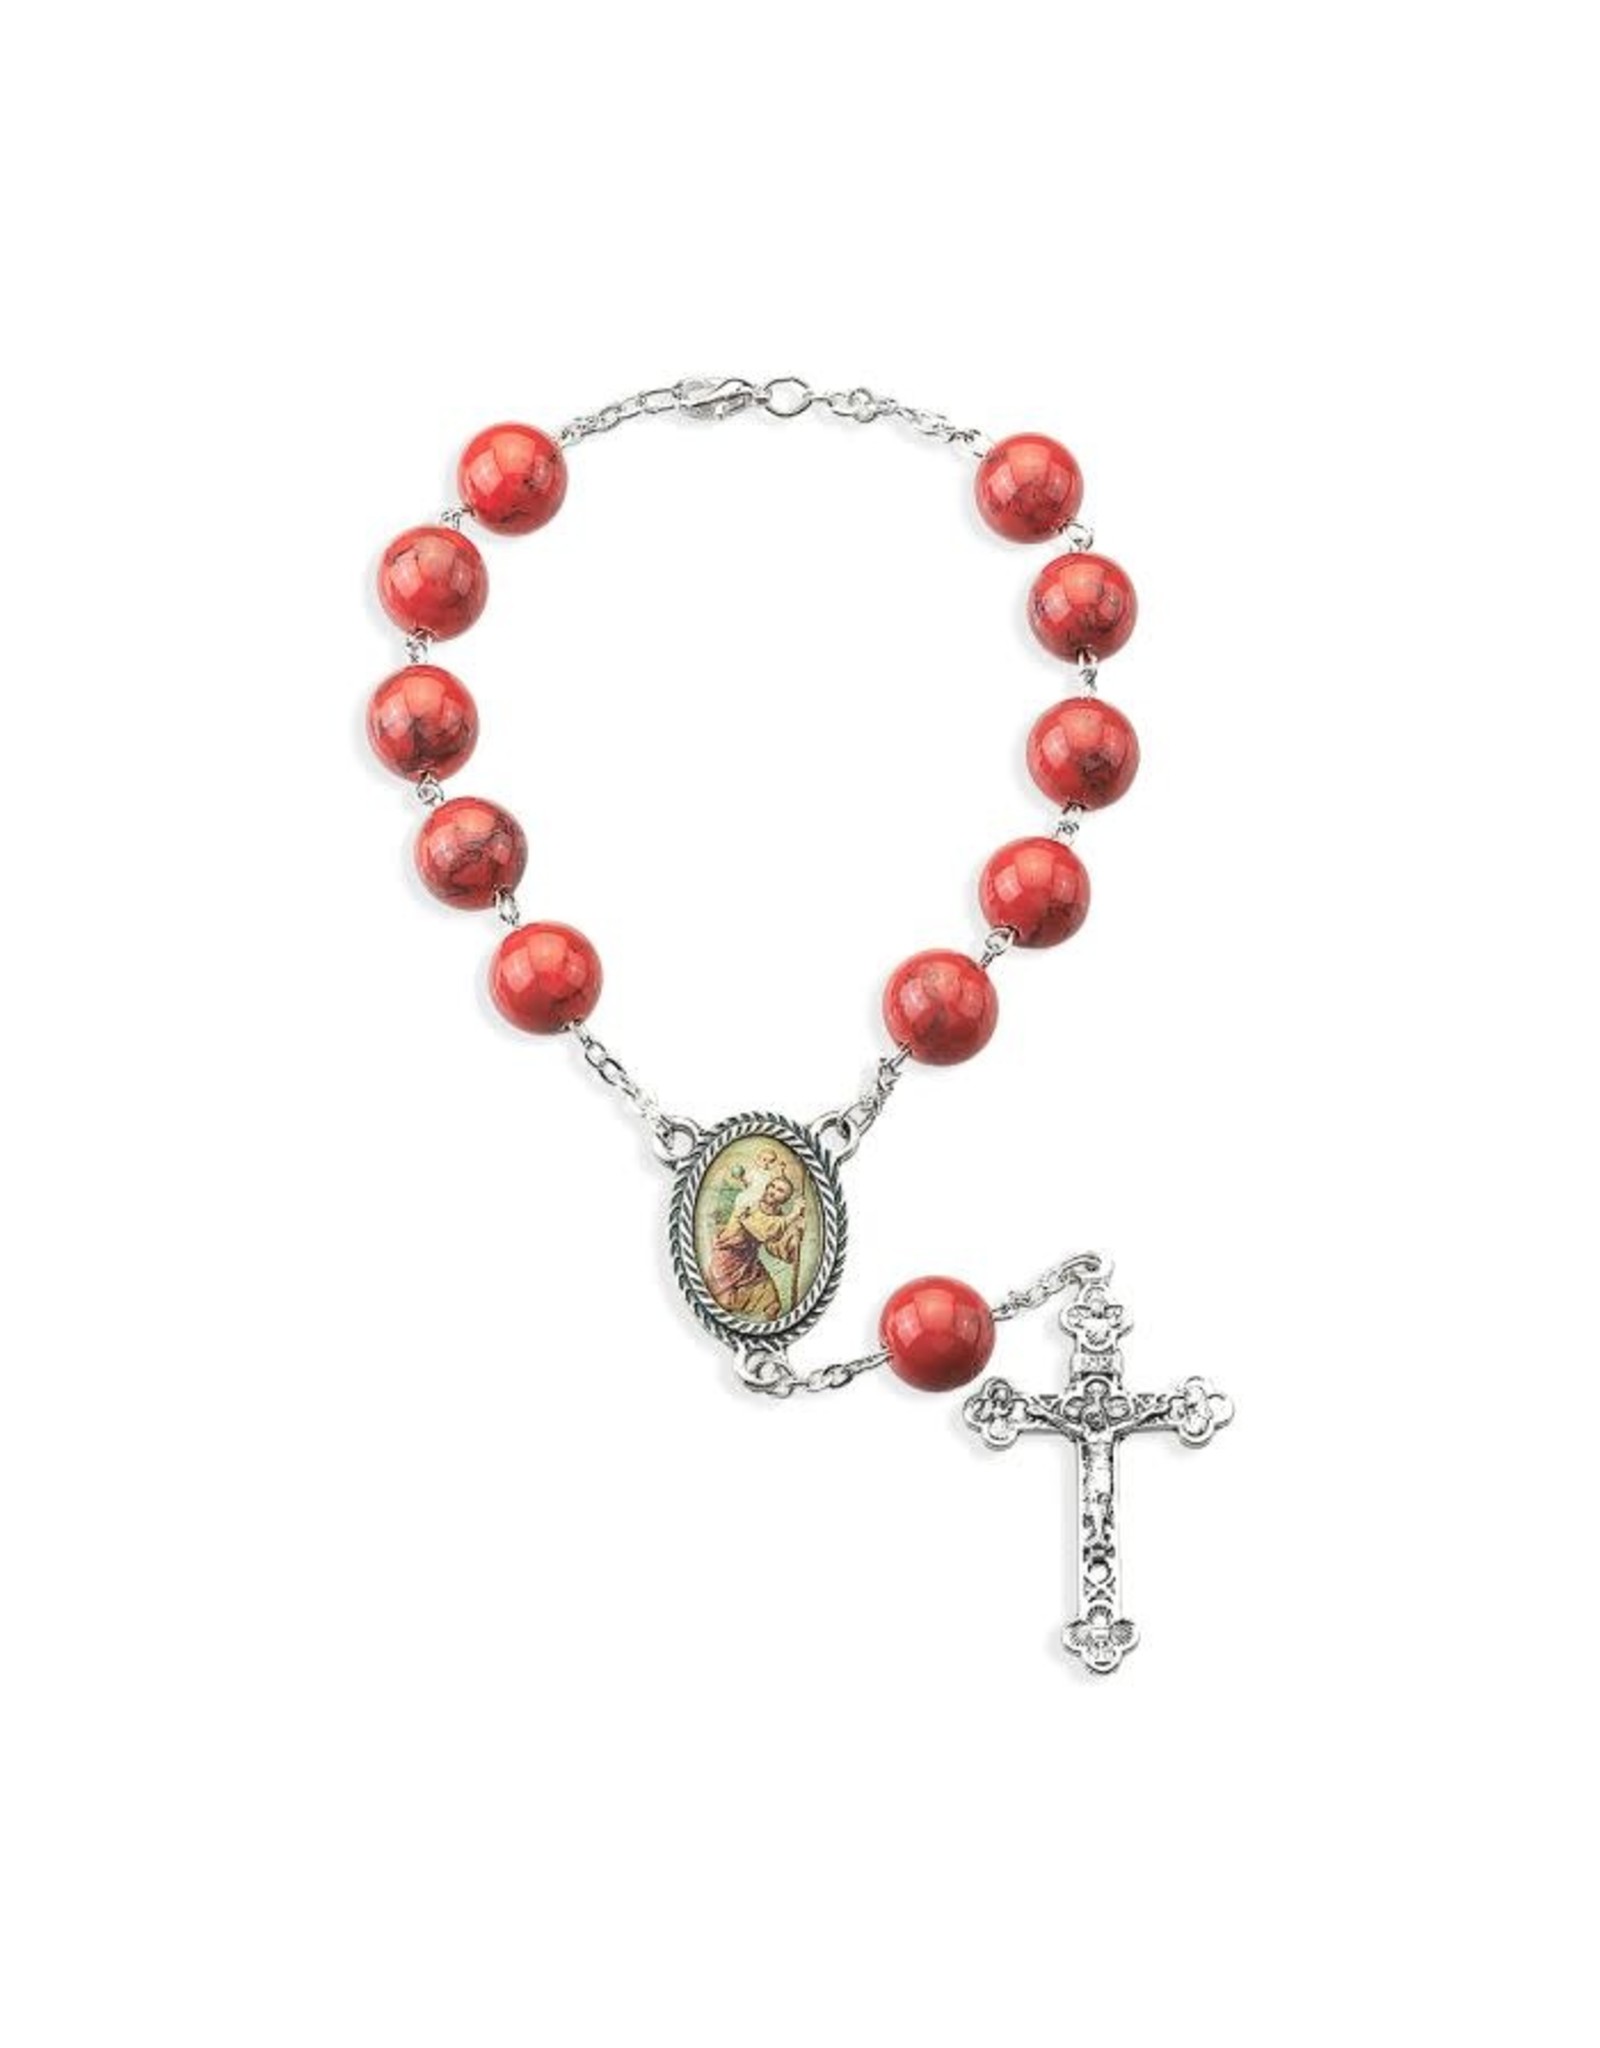 Auto Rosary - St. Christopher, Pink